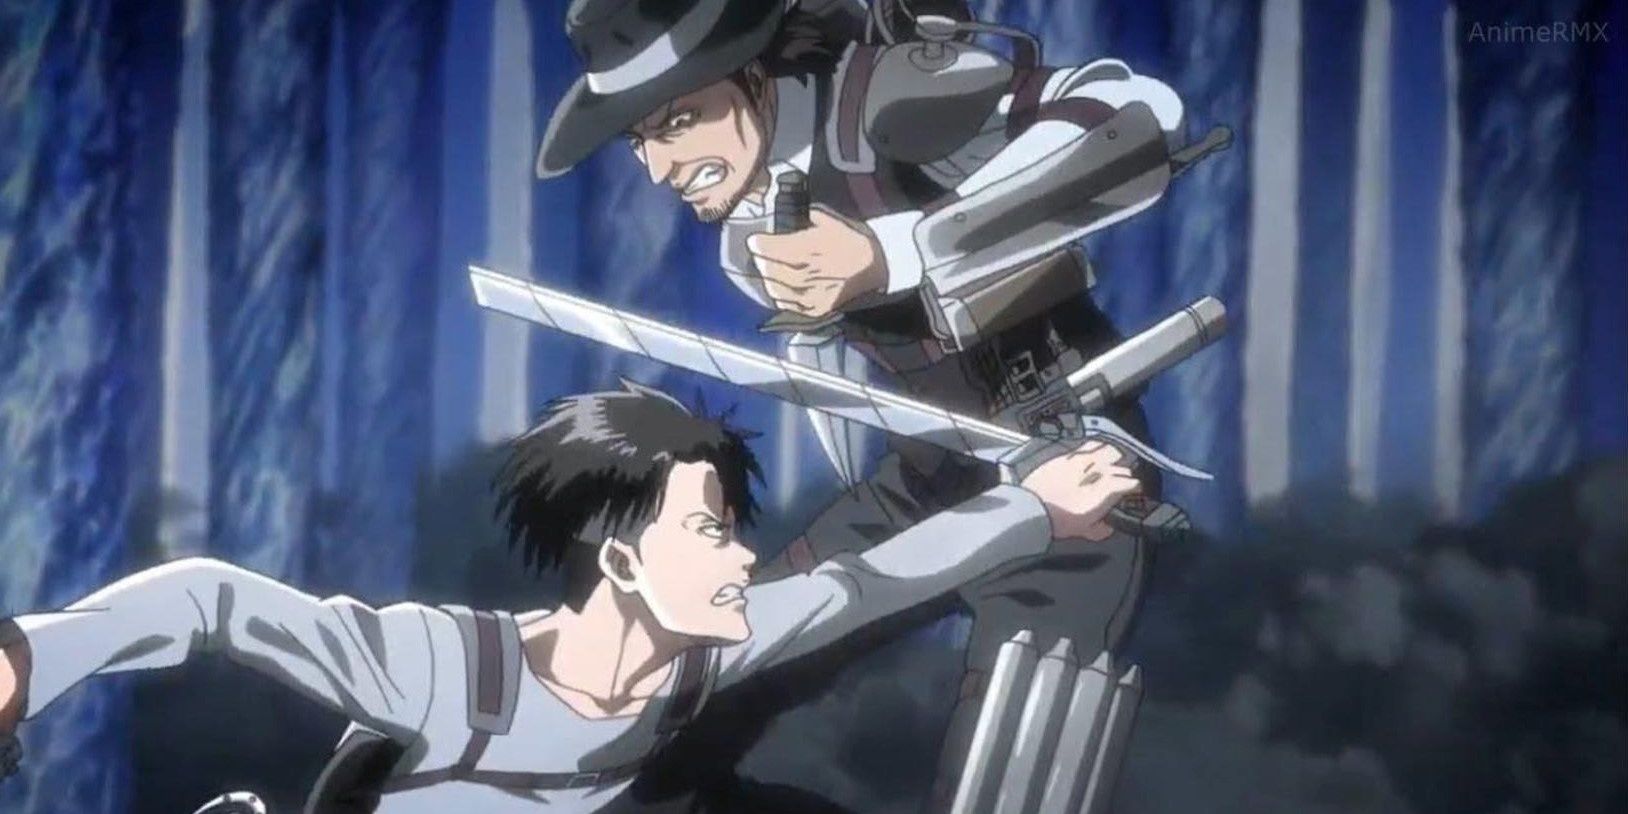 Levi versus Kenny from Attack on Titan